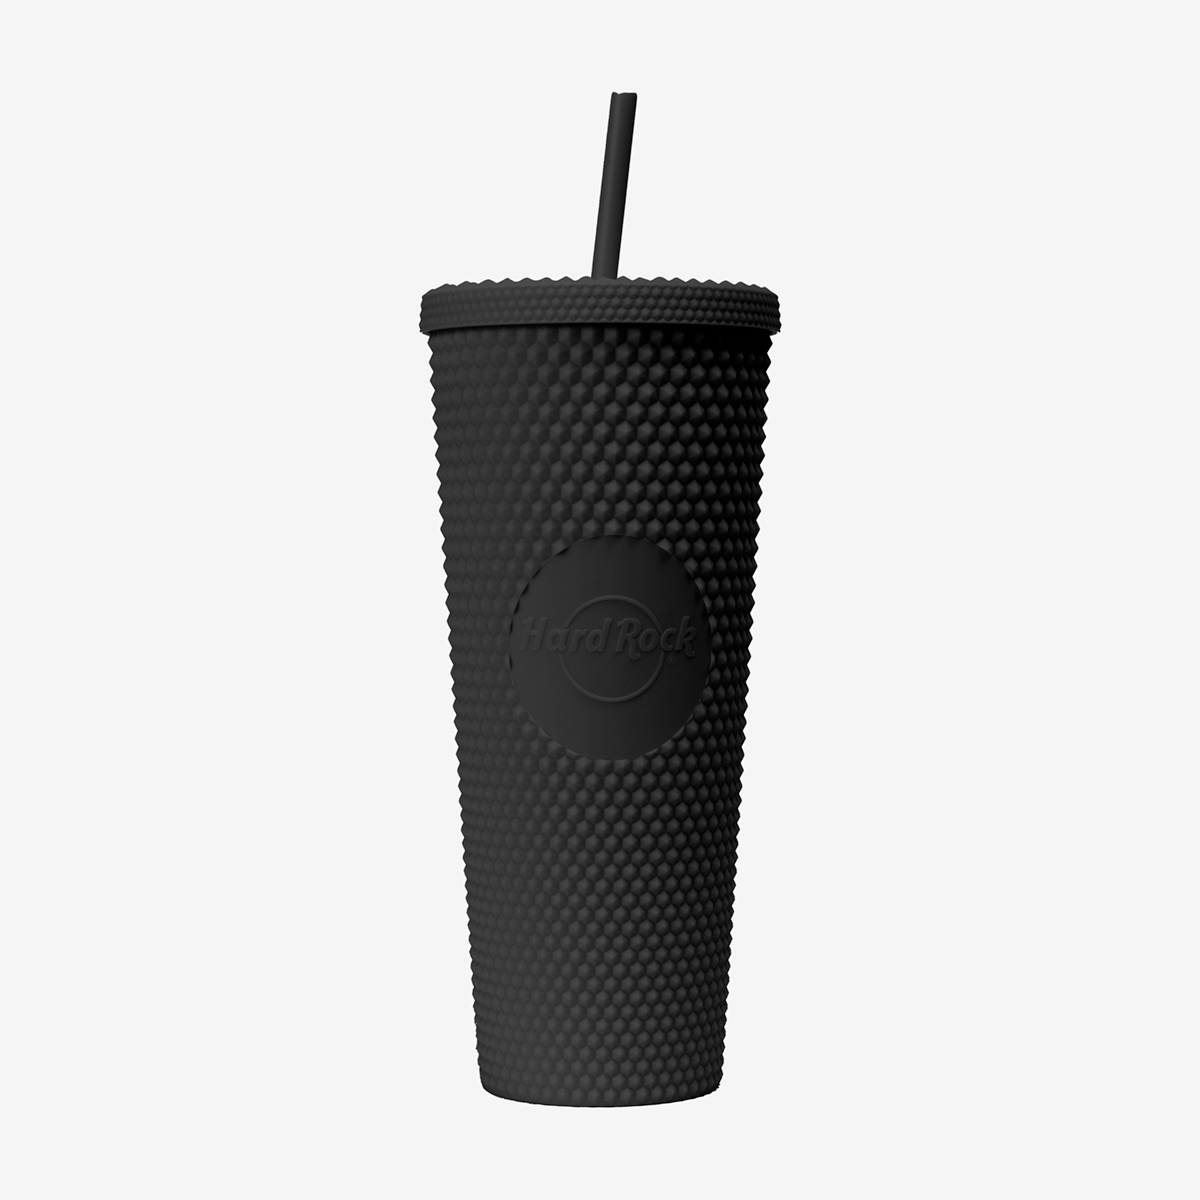 Hard Rock Pop of Color Tumbler with Straw in Black 24oz image number 1